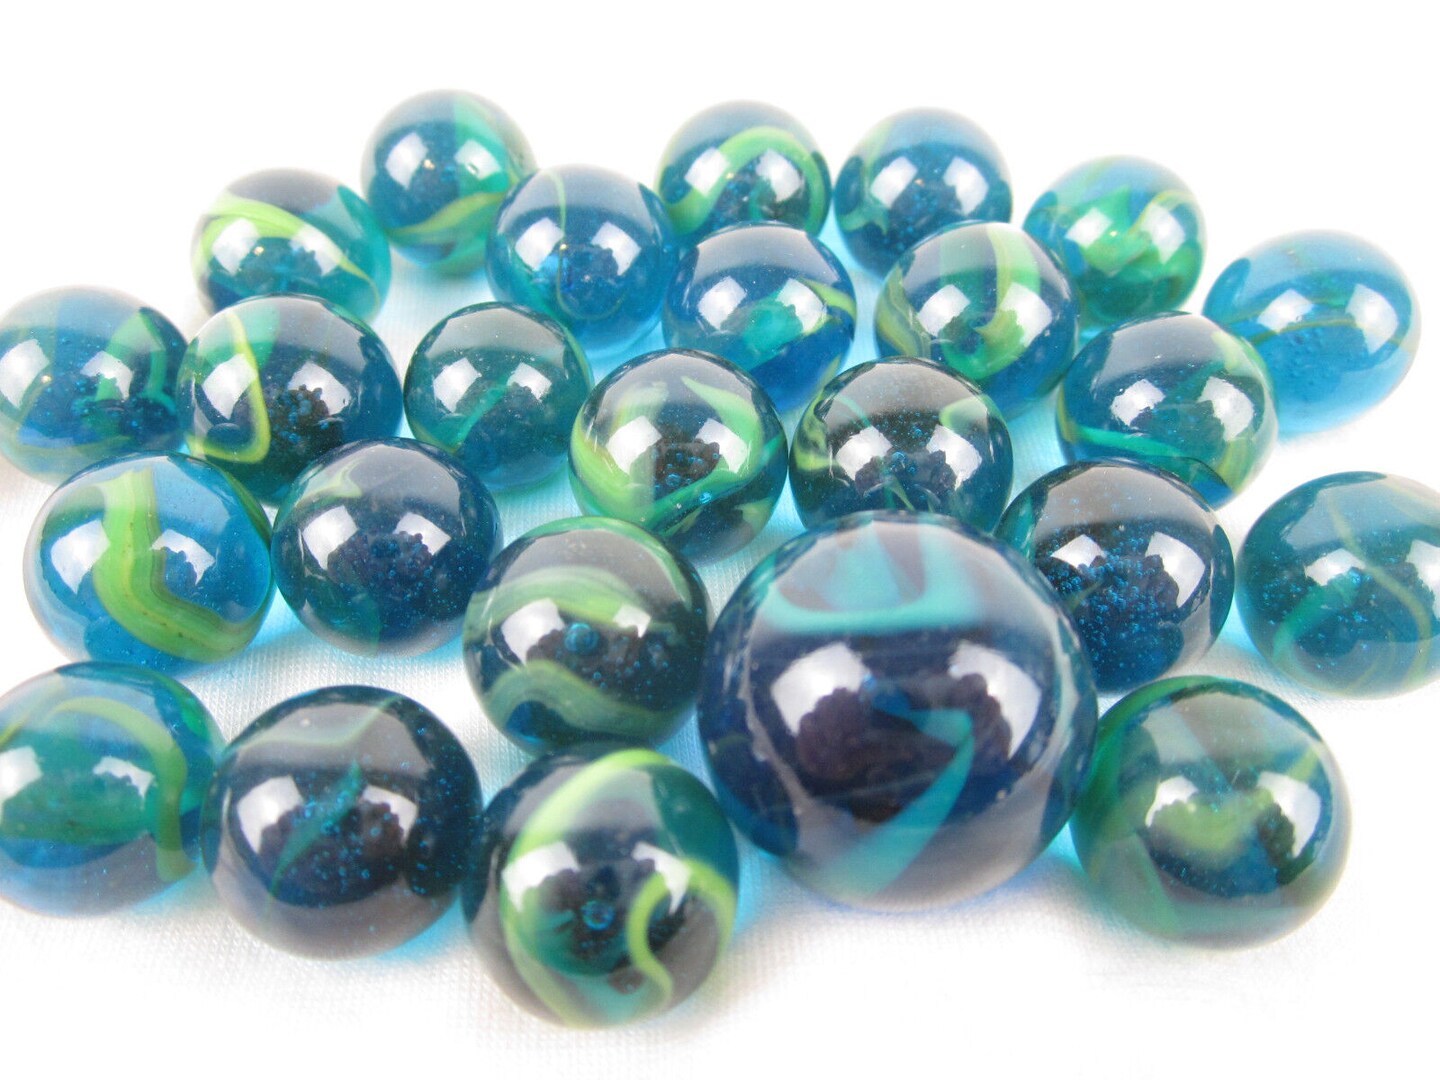 25 Glass Marbles SEA TURTLE Sea Blue/Green Translucent Game Pack Shooter Swirl